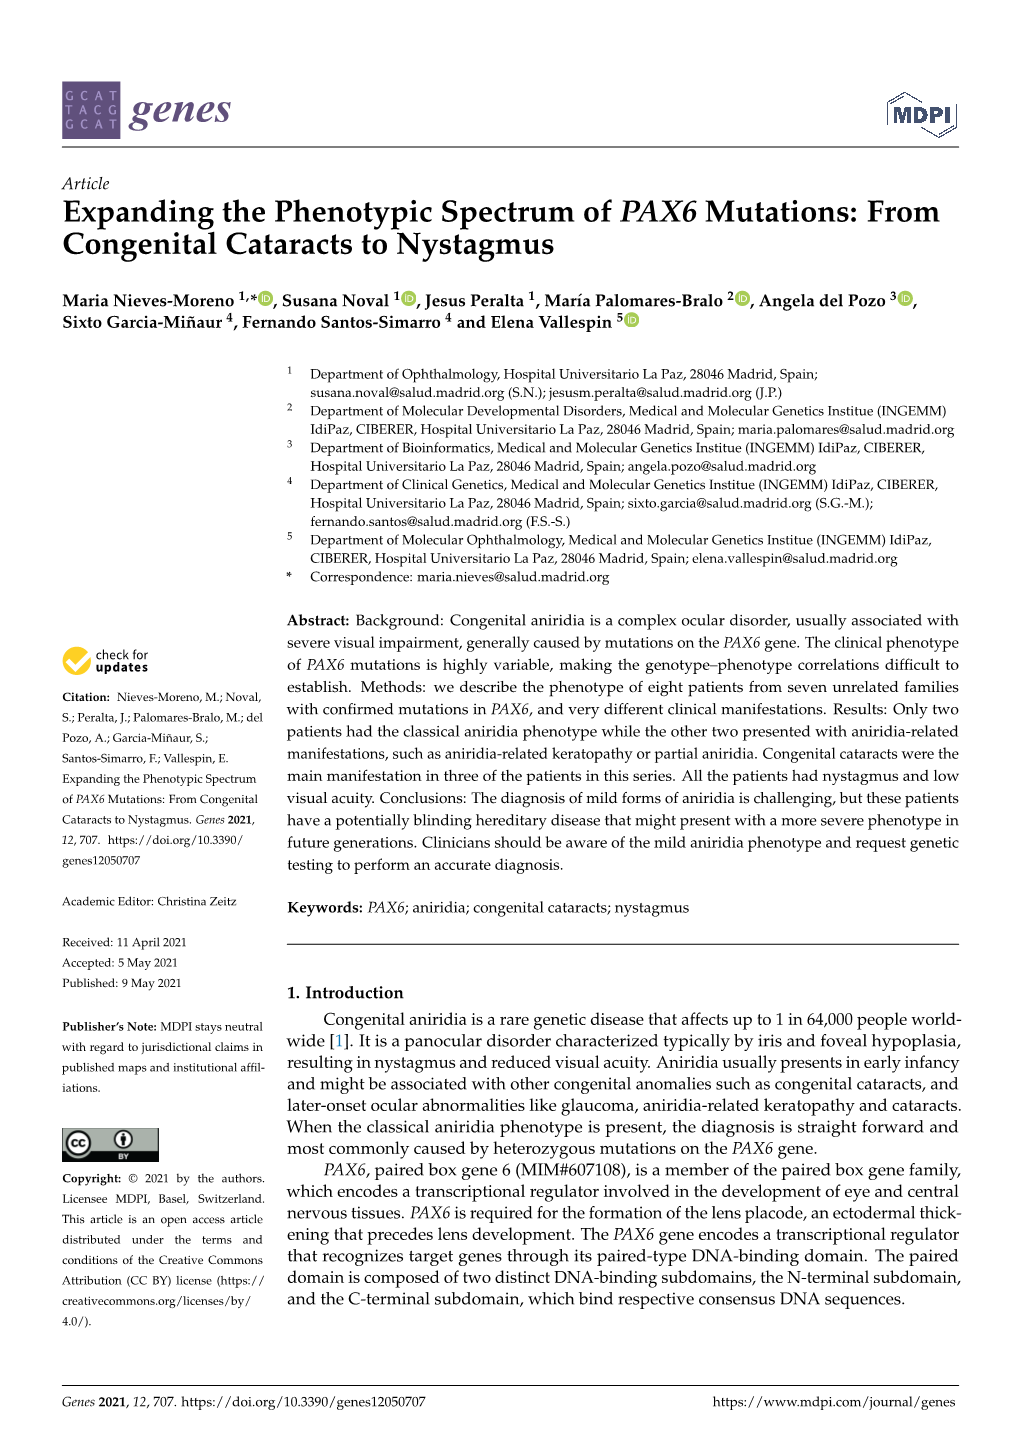 Expanding the Phenotypic Spectrum of PAX6 Mutations: from Congenital Cataracts to Nystagmus